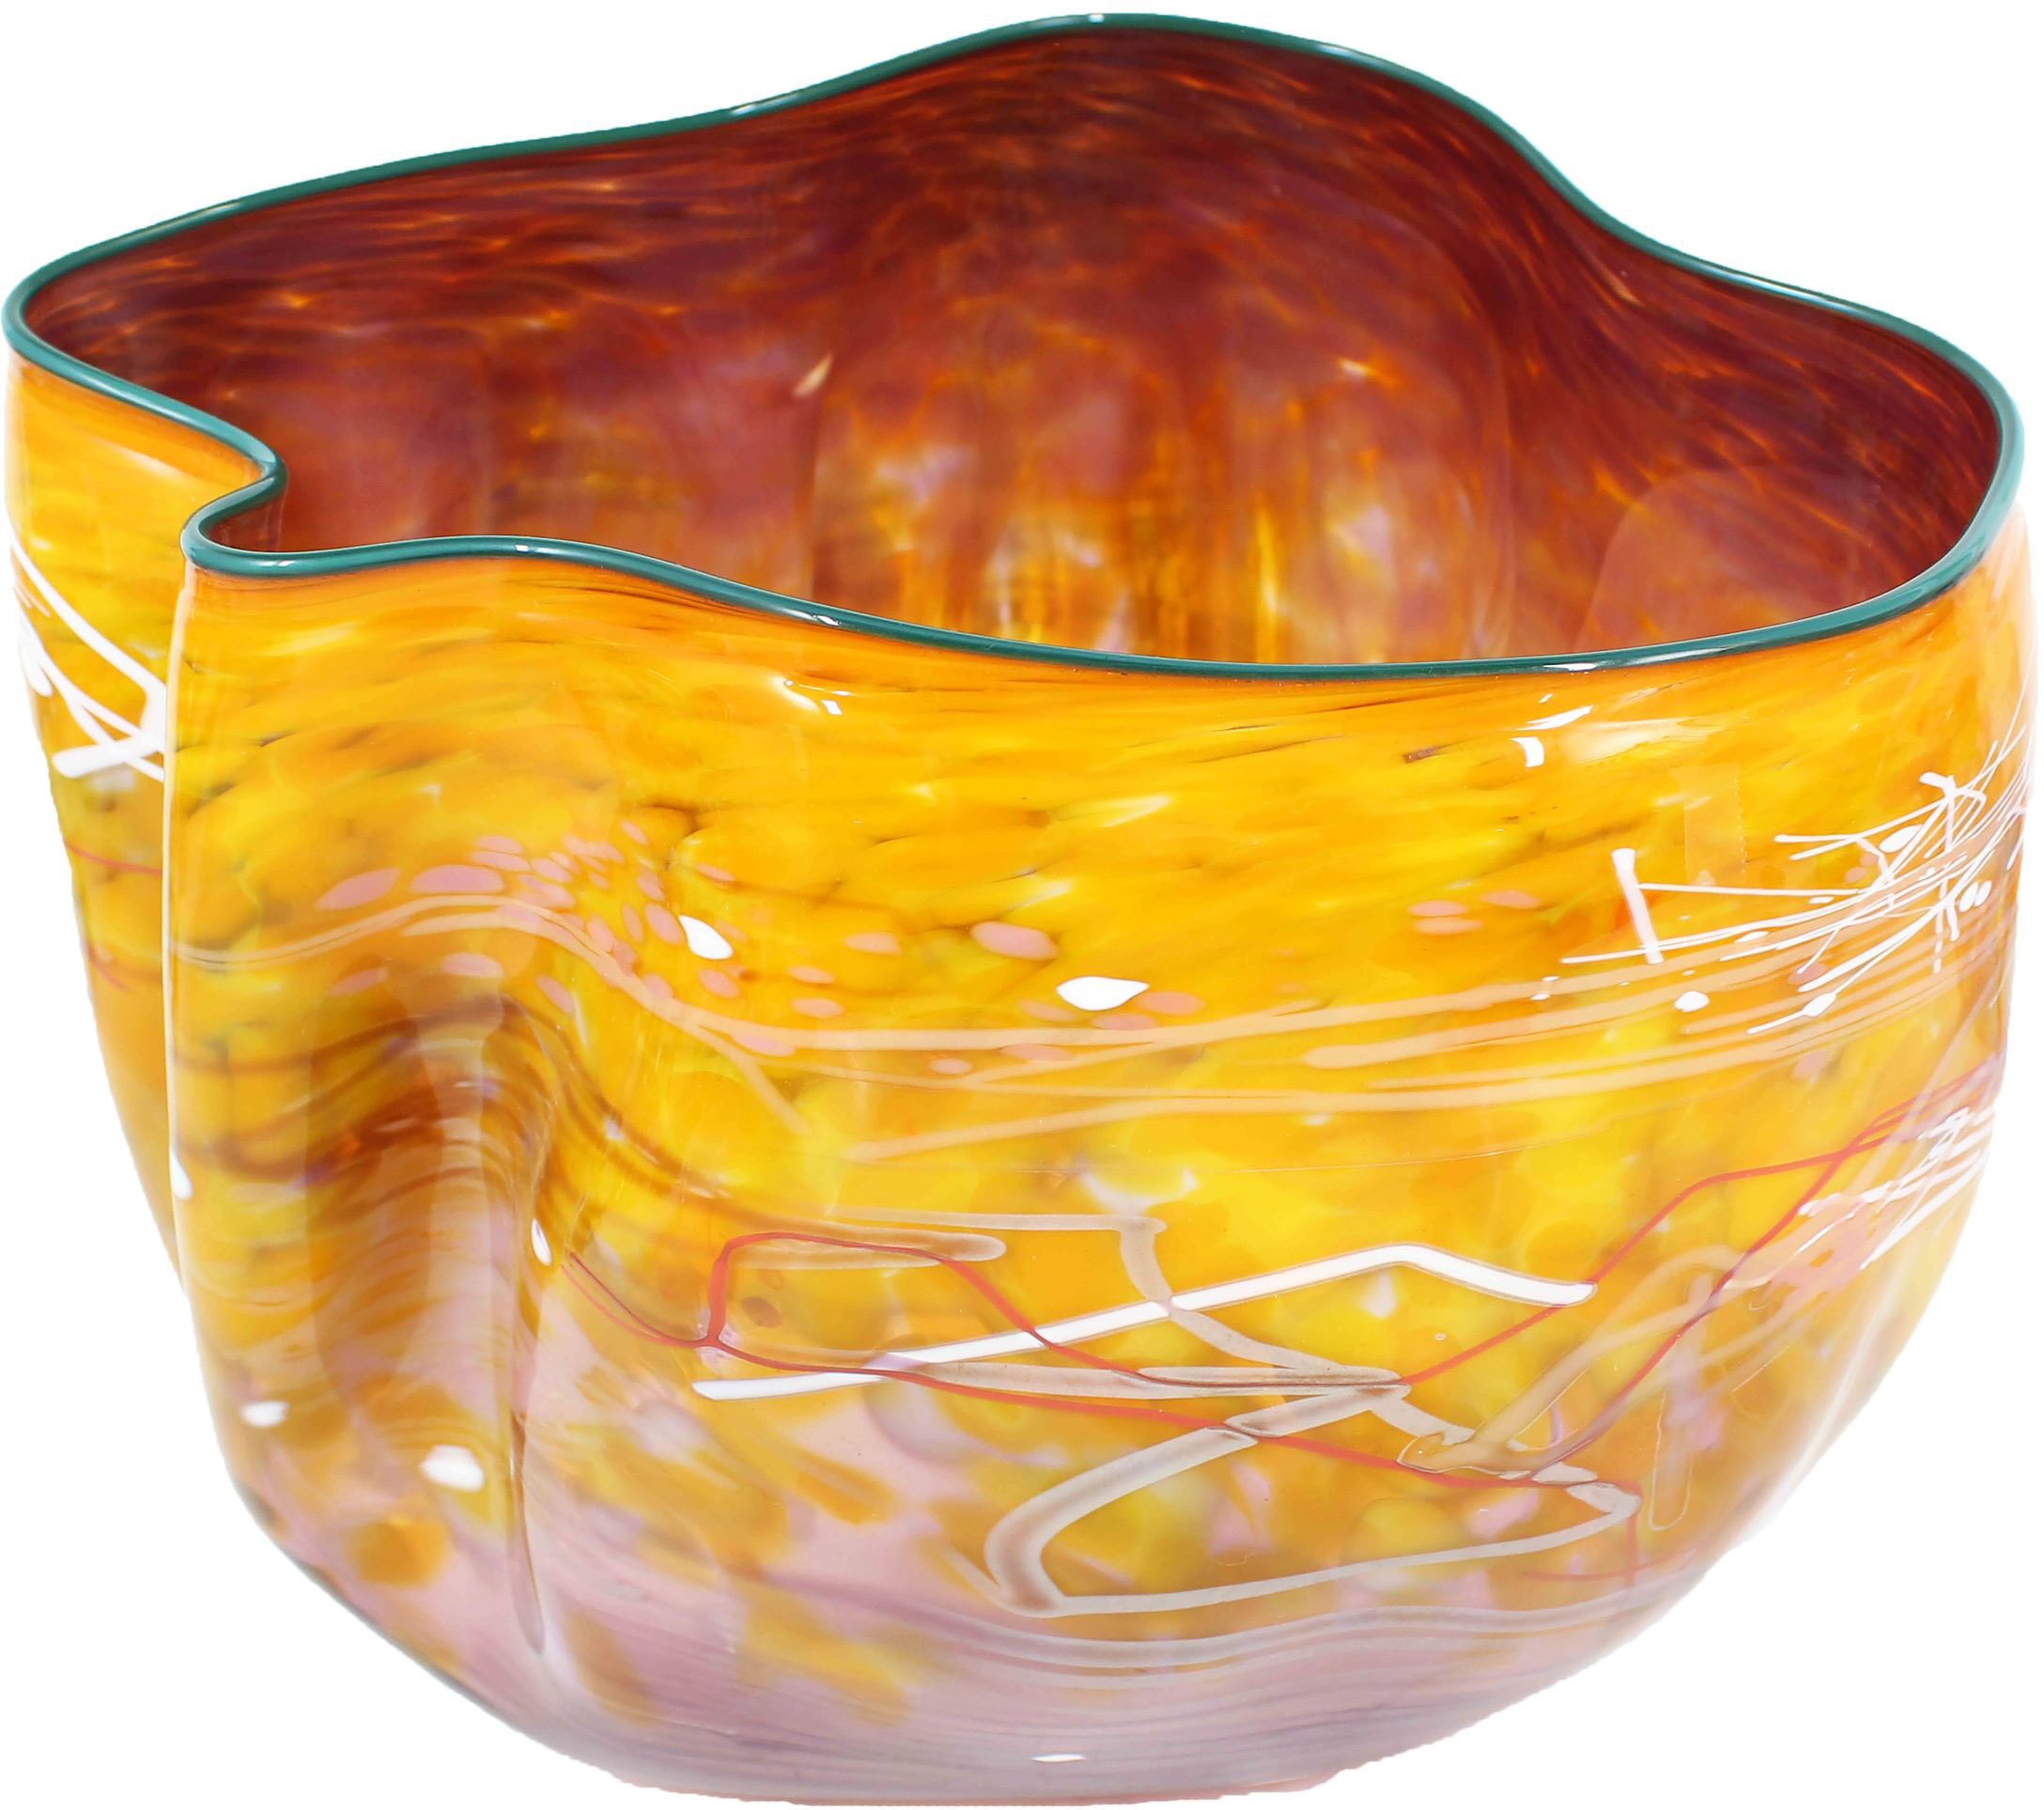 Dale Chihuly art glass bowl, est. $6,000-$8,000